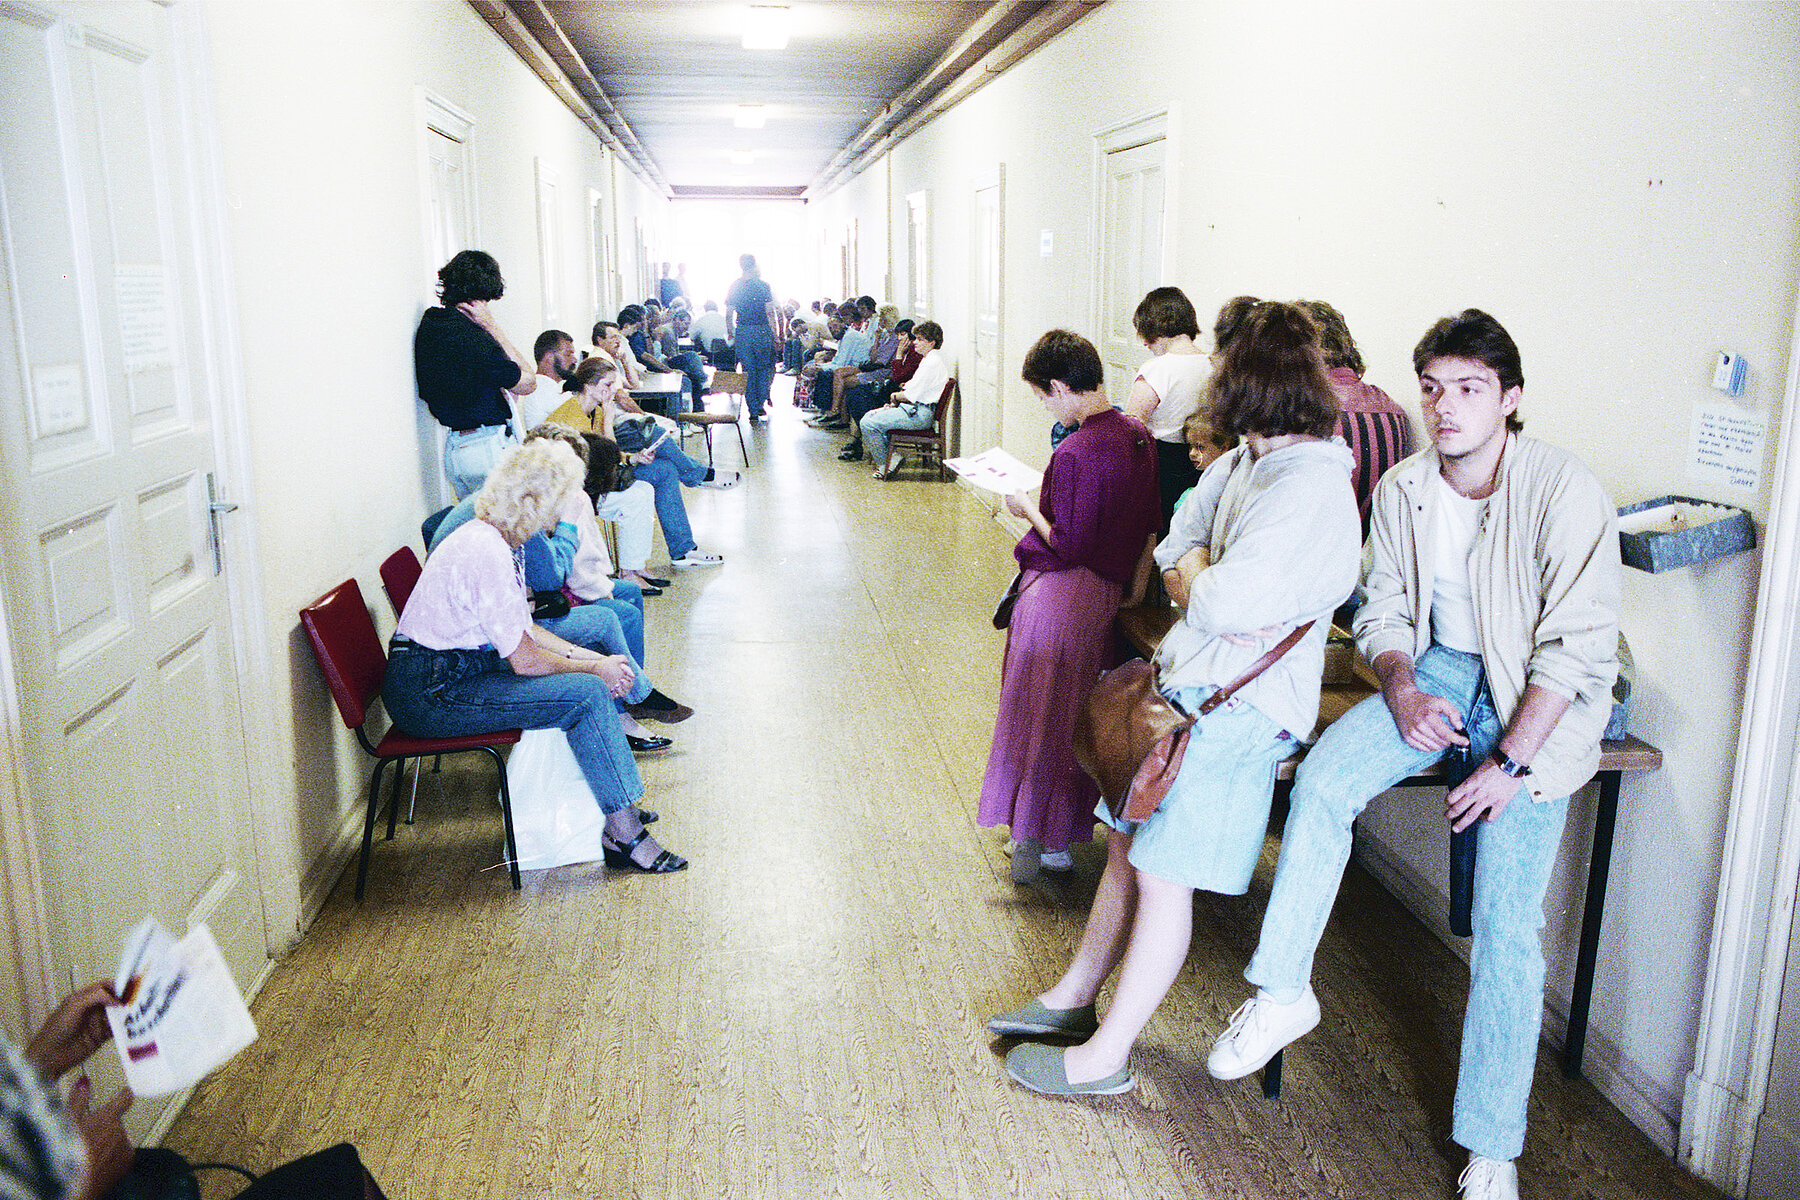 People wait in a beige office corridor, sitting and standing.